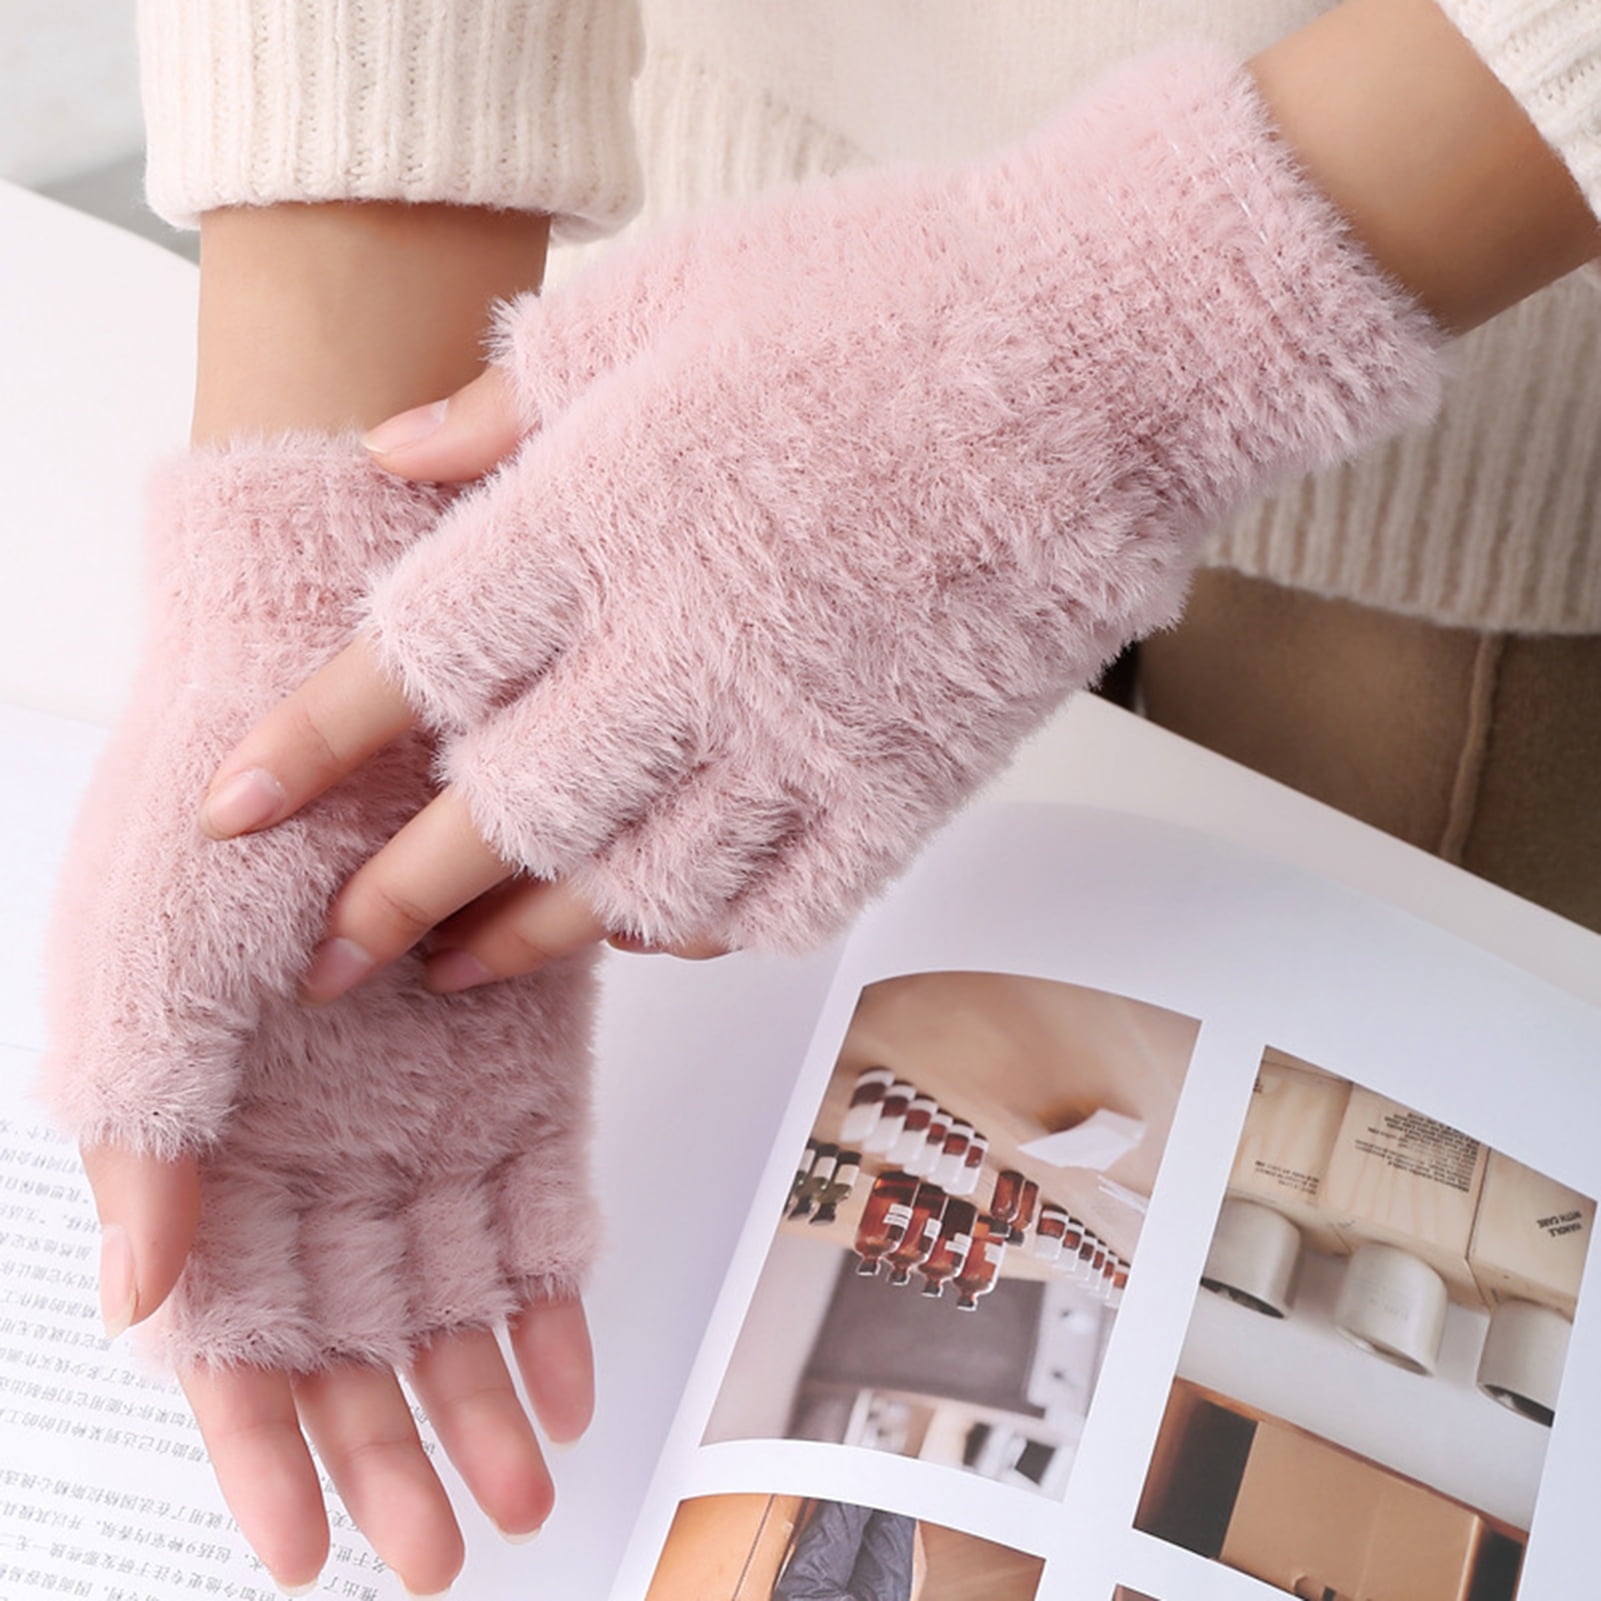 rygai 1 Pcs Drawing Gloves Breathable Prevent Mess Up Anti-mistouch  Function Artist Gloves Stretchy Soft Fabric Protect Screen with Two Finger